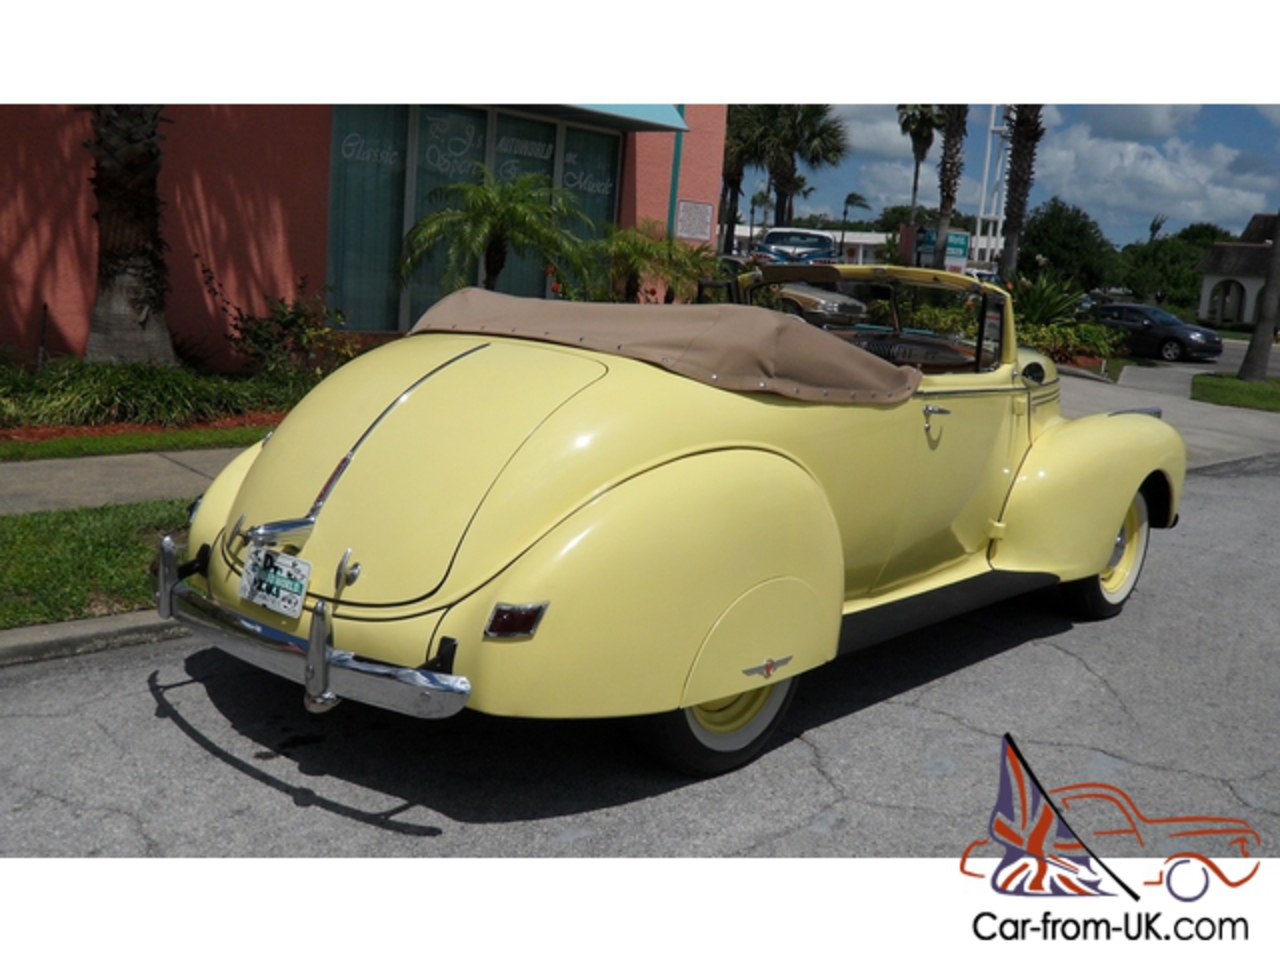 1940 HUDSON DELUXE SIX P40 CONVERTIBLE RARE CLASSIC MUST SEE